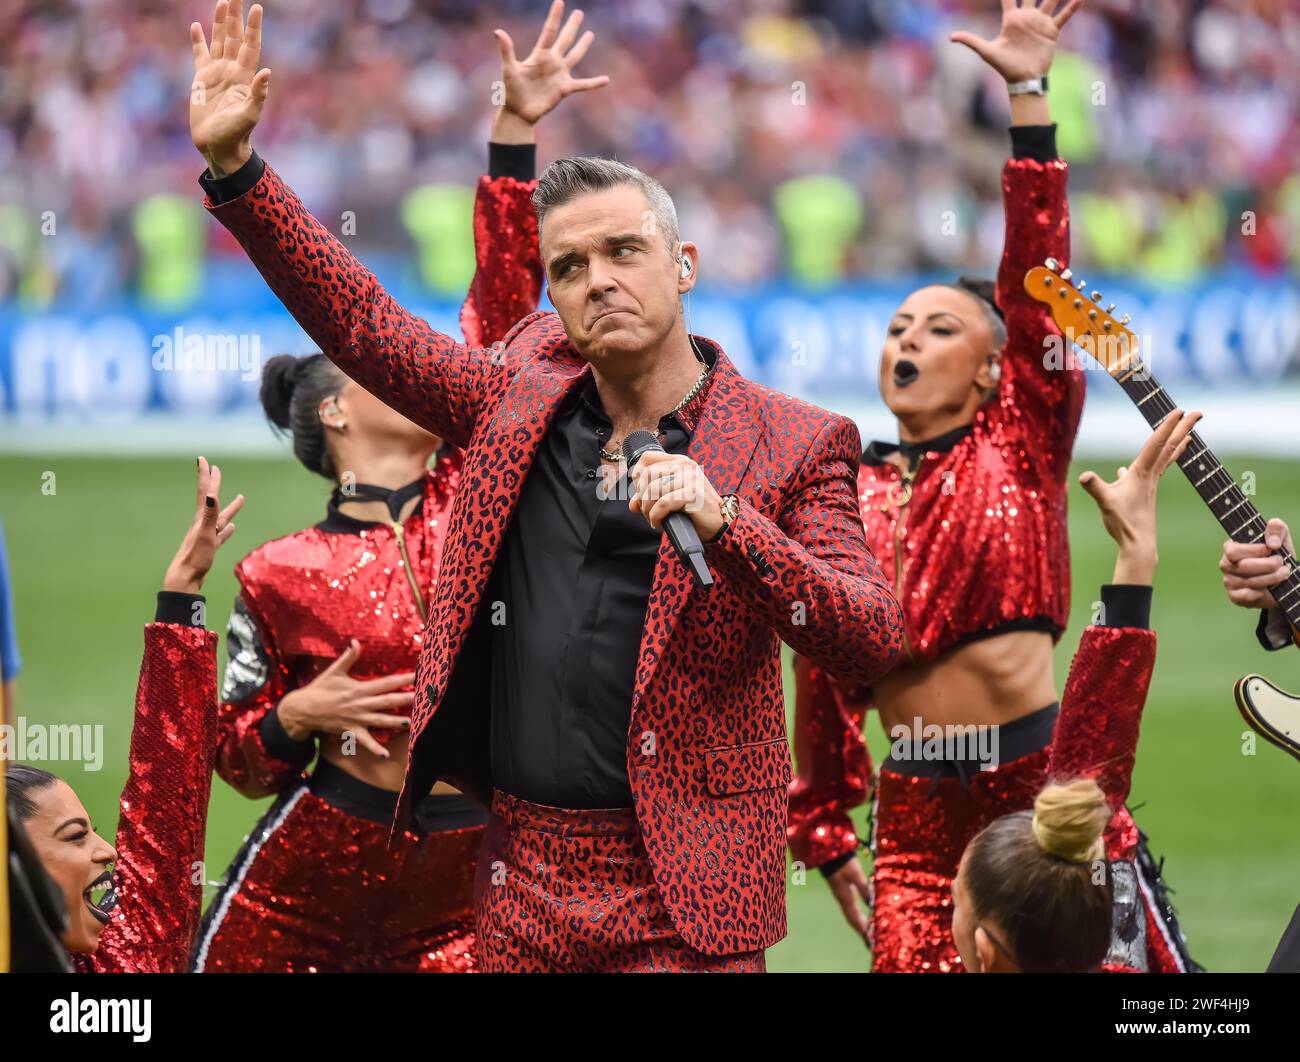 Moscow, Russia – June 14, 2018. British singer Robbie Williams performing at the opening ceremony of FIFA World Cup 2018 in Russia. Stock Photo